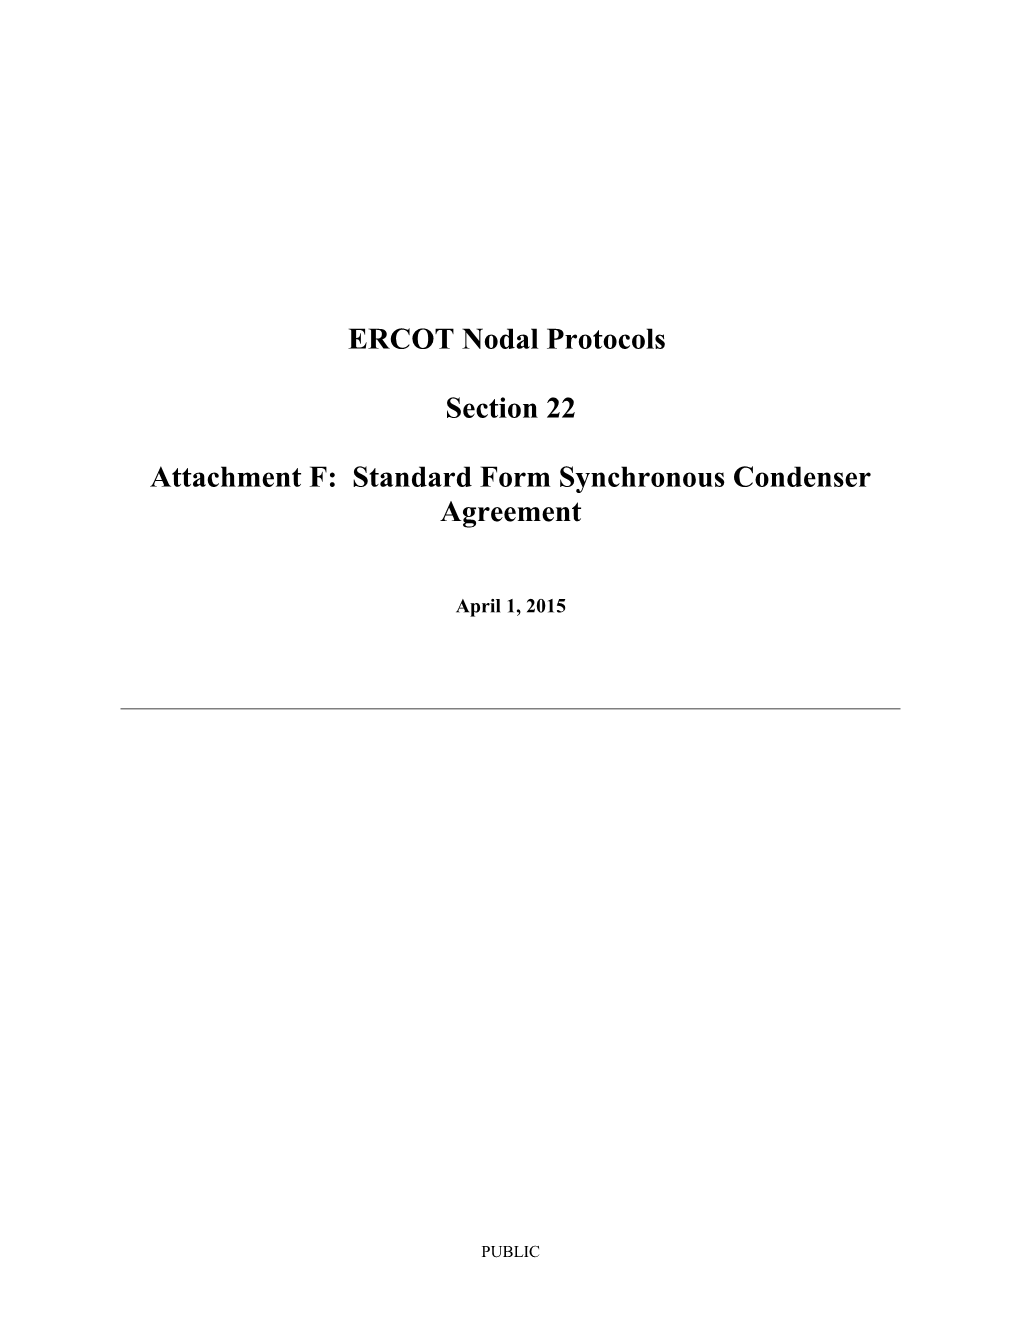 Attachment F: Standard Form Synchronous Condenser Agreement